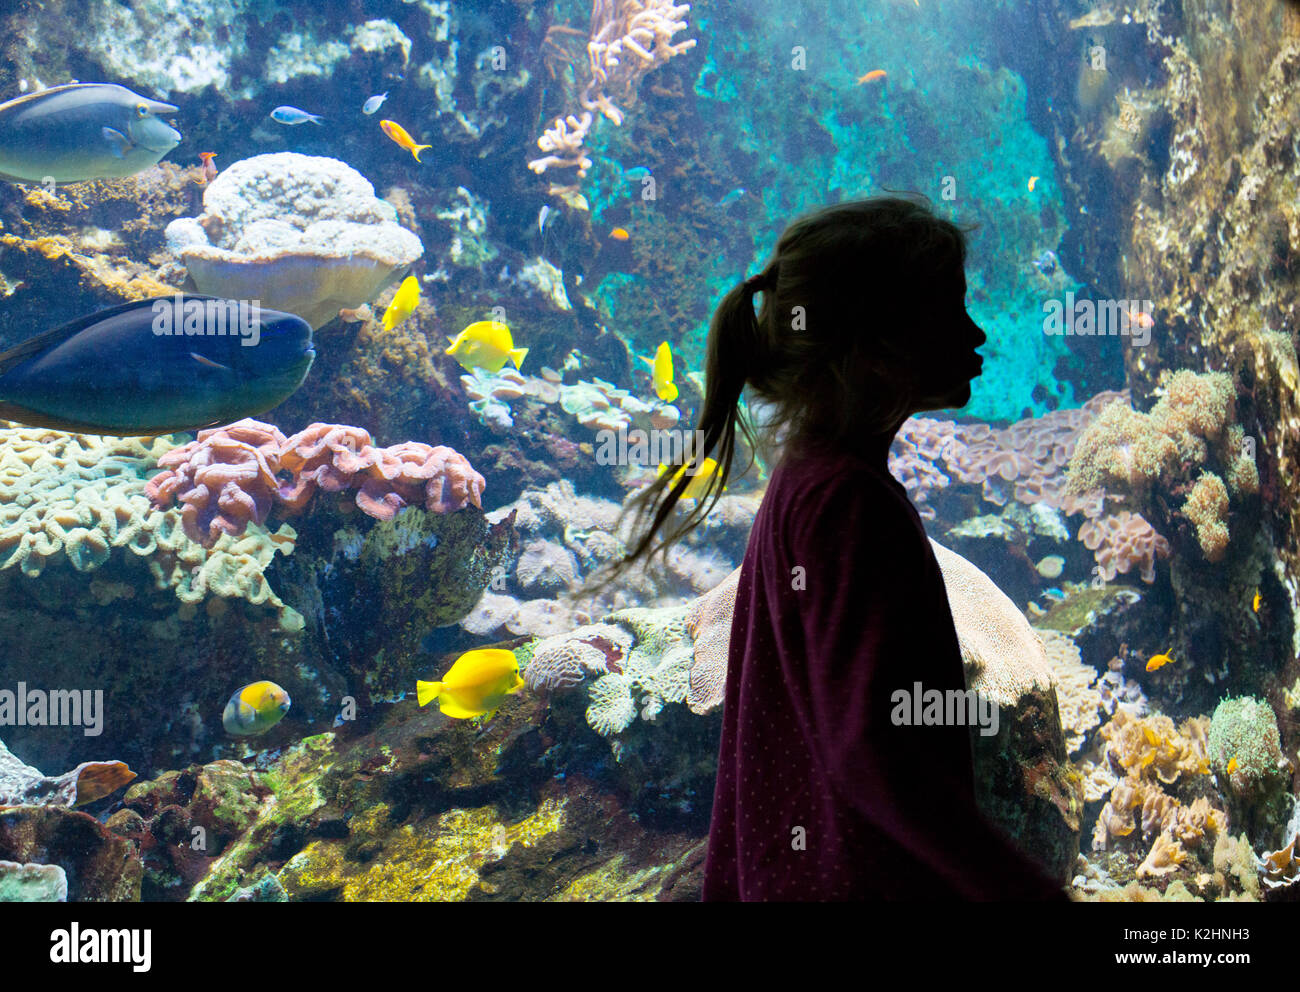 Aquarium - the Great Aquarium, Saint Malo, Brittany France - a young girl in front of a tank of colourful fish and Coral, St Malo, Brittany France Stock Photo